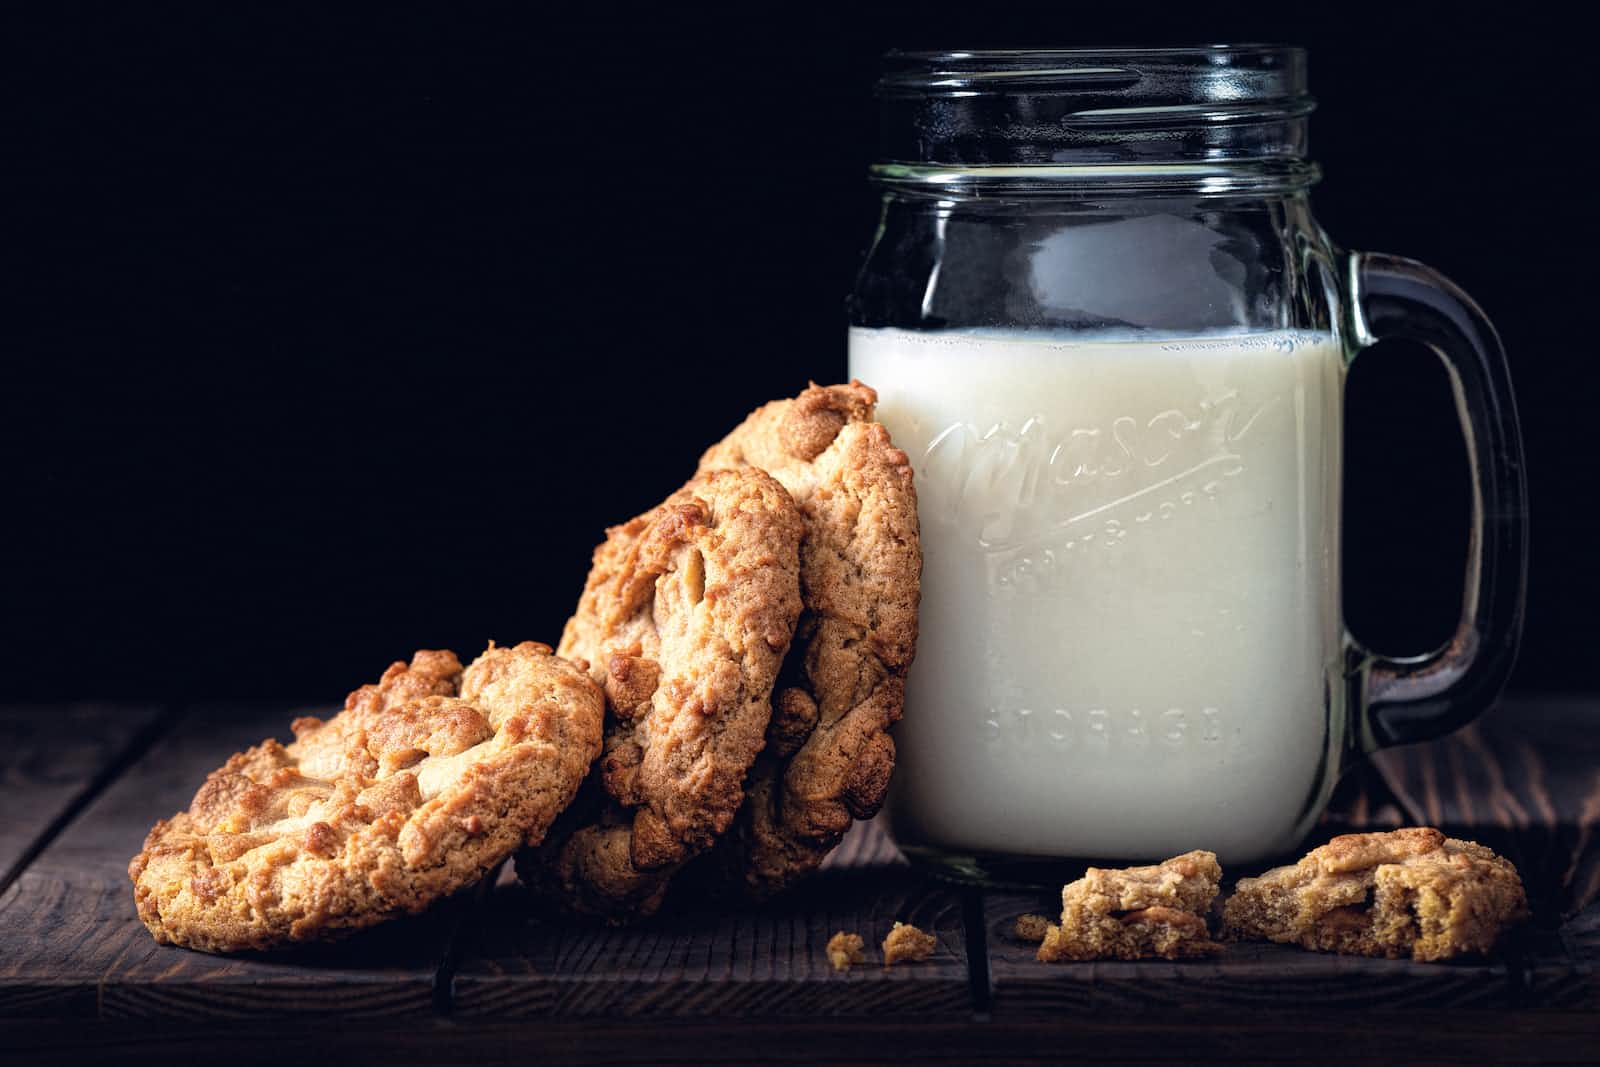 a2 Milk company secures trademark rights